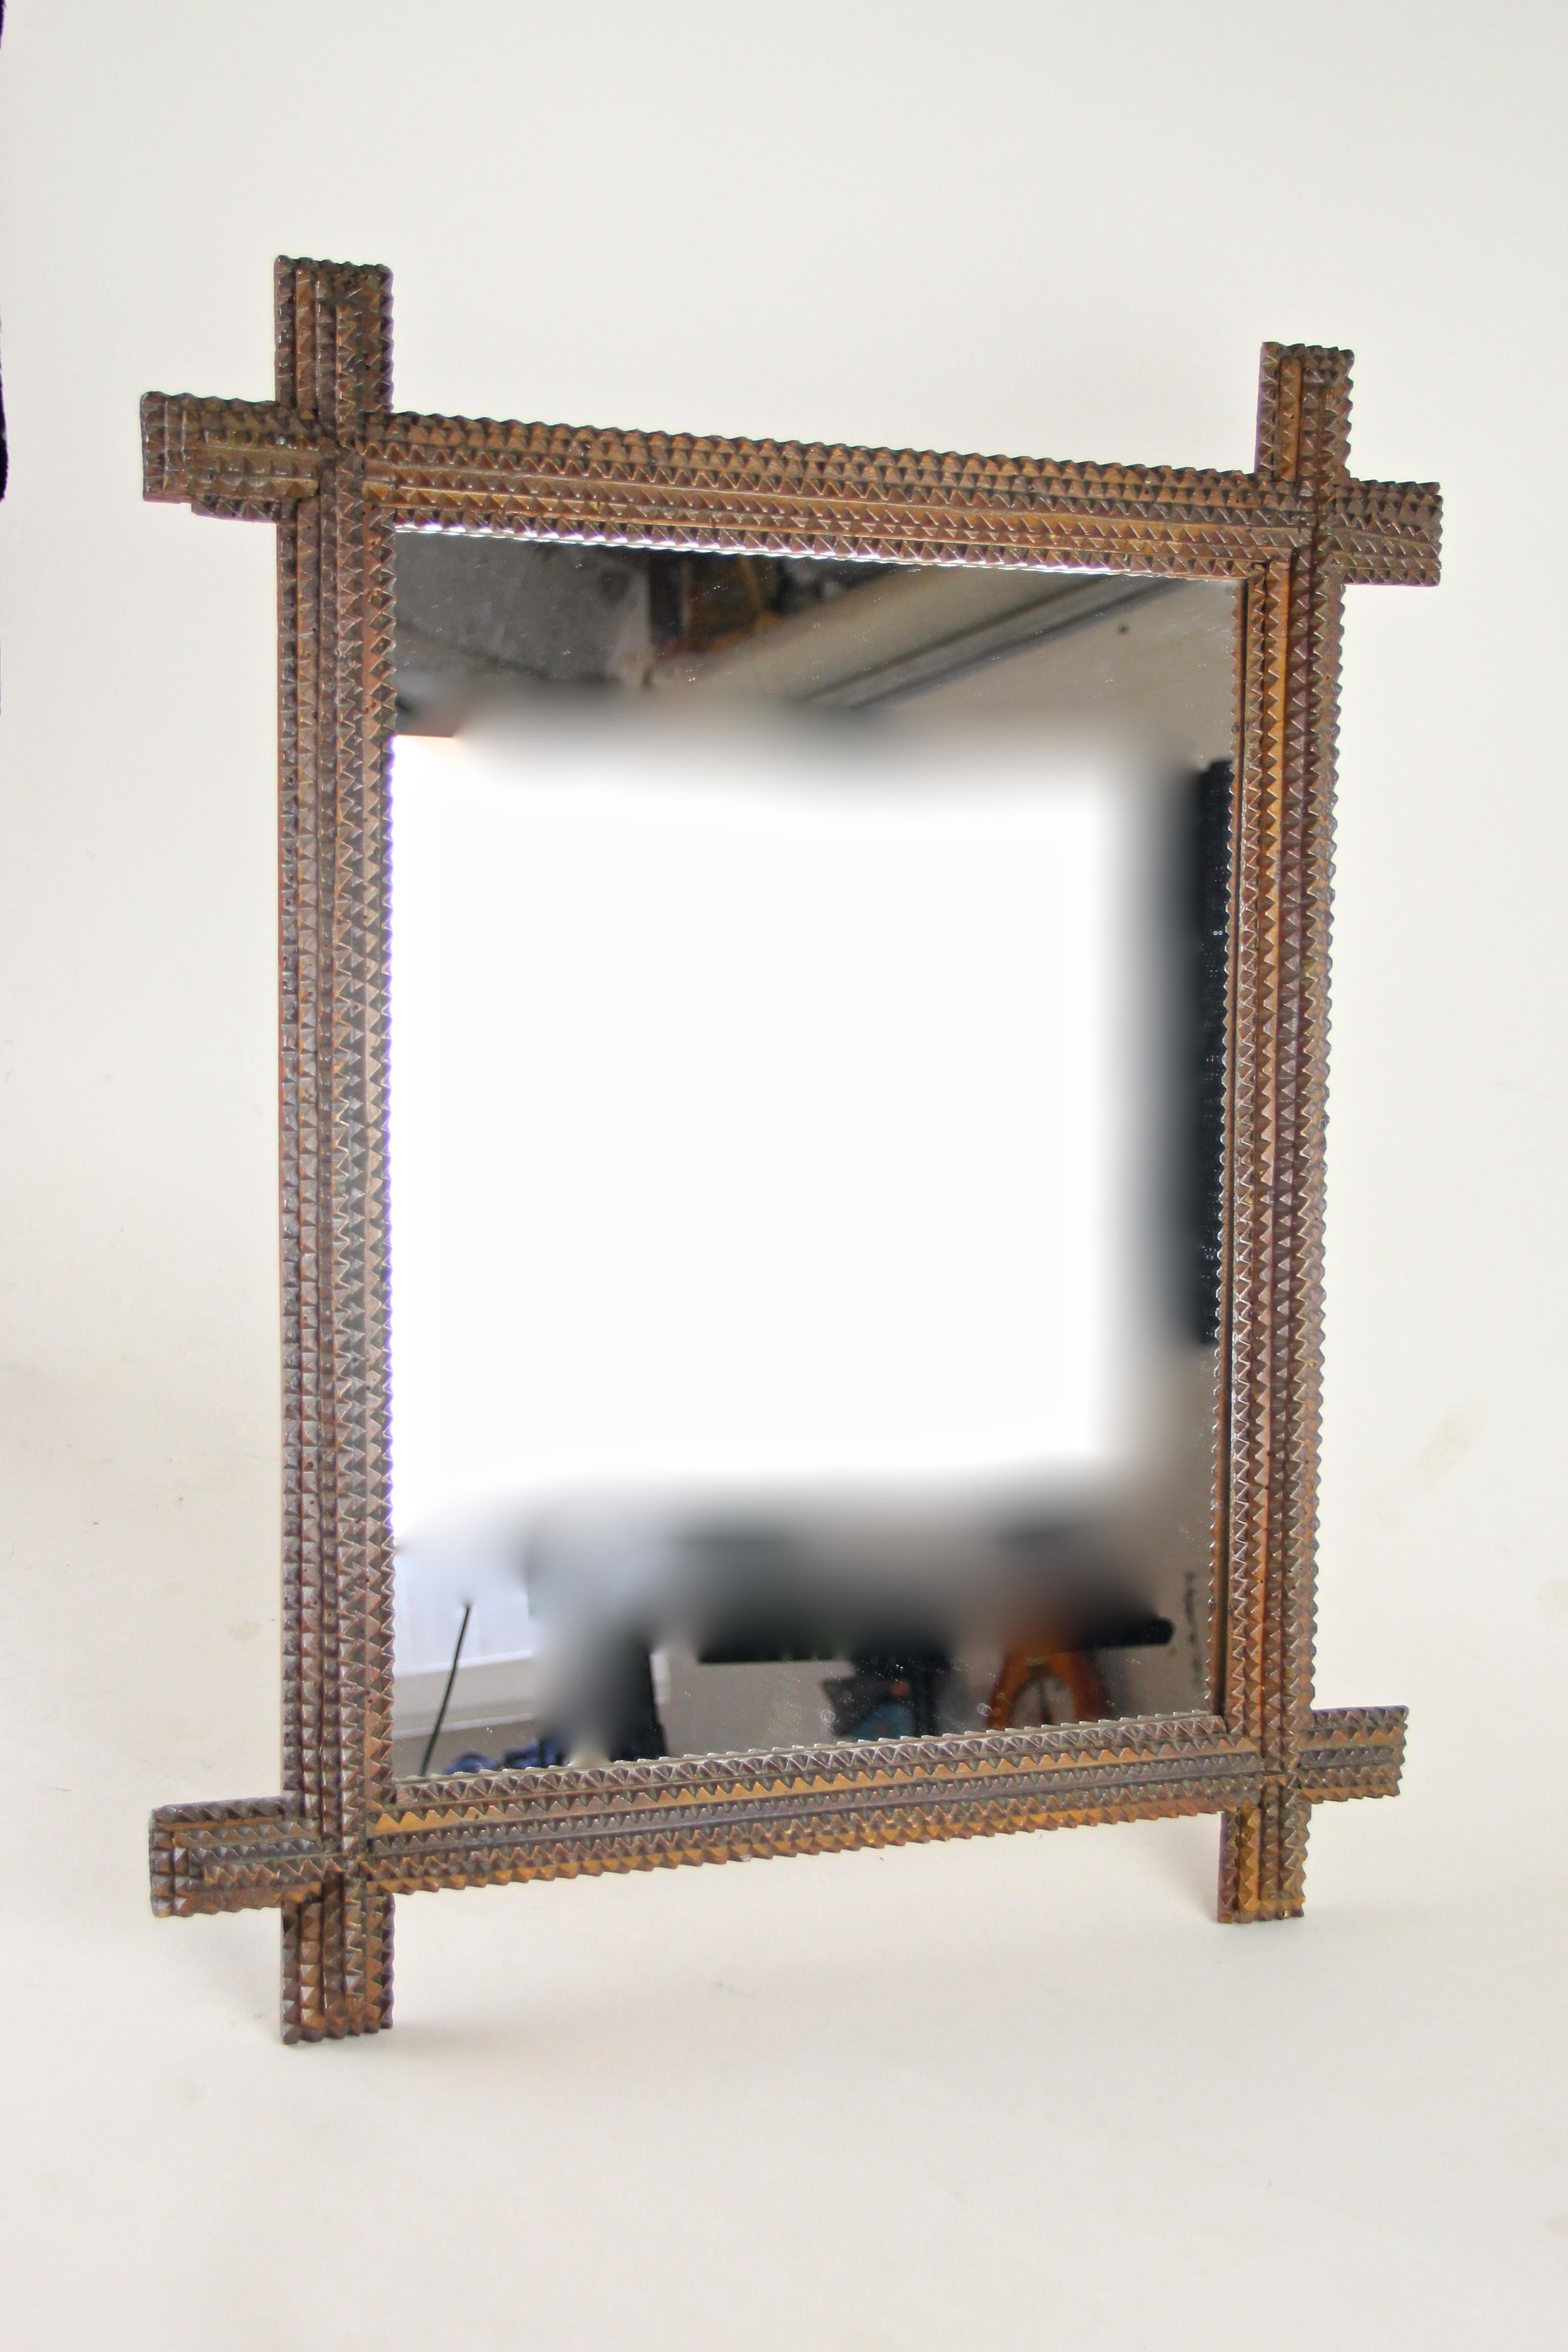 Unique carved Tramp Art Mirror from the second half of the 19th century in Austria. This rustic wall mirror from circa 1880 has been artfully hand carved out of basswood and comes with a light shellac finished surface. The mirror glass has been